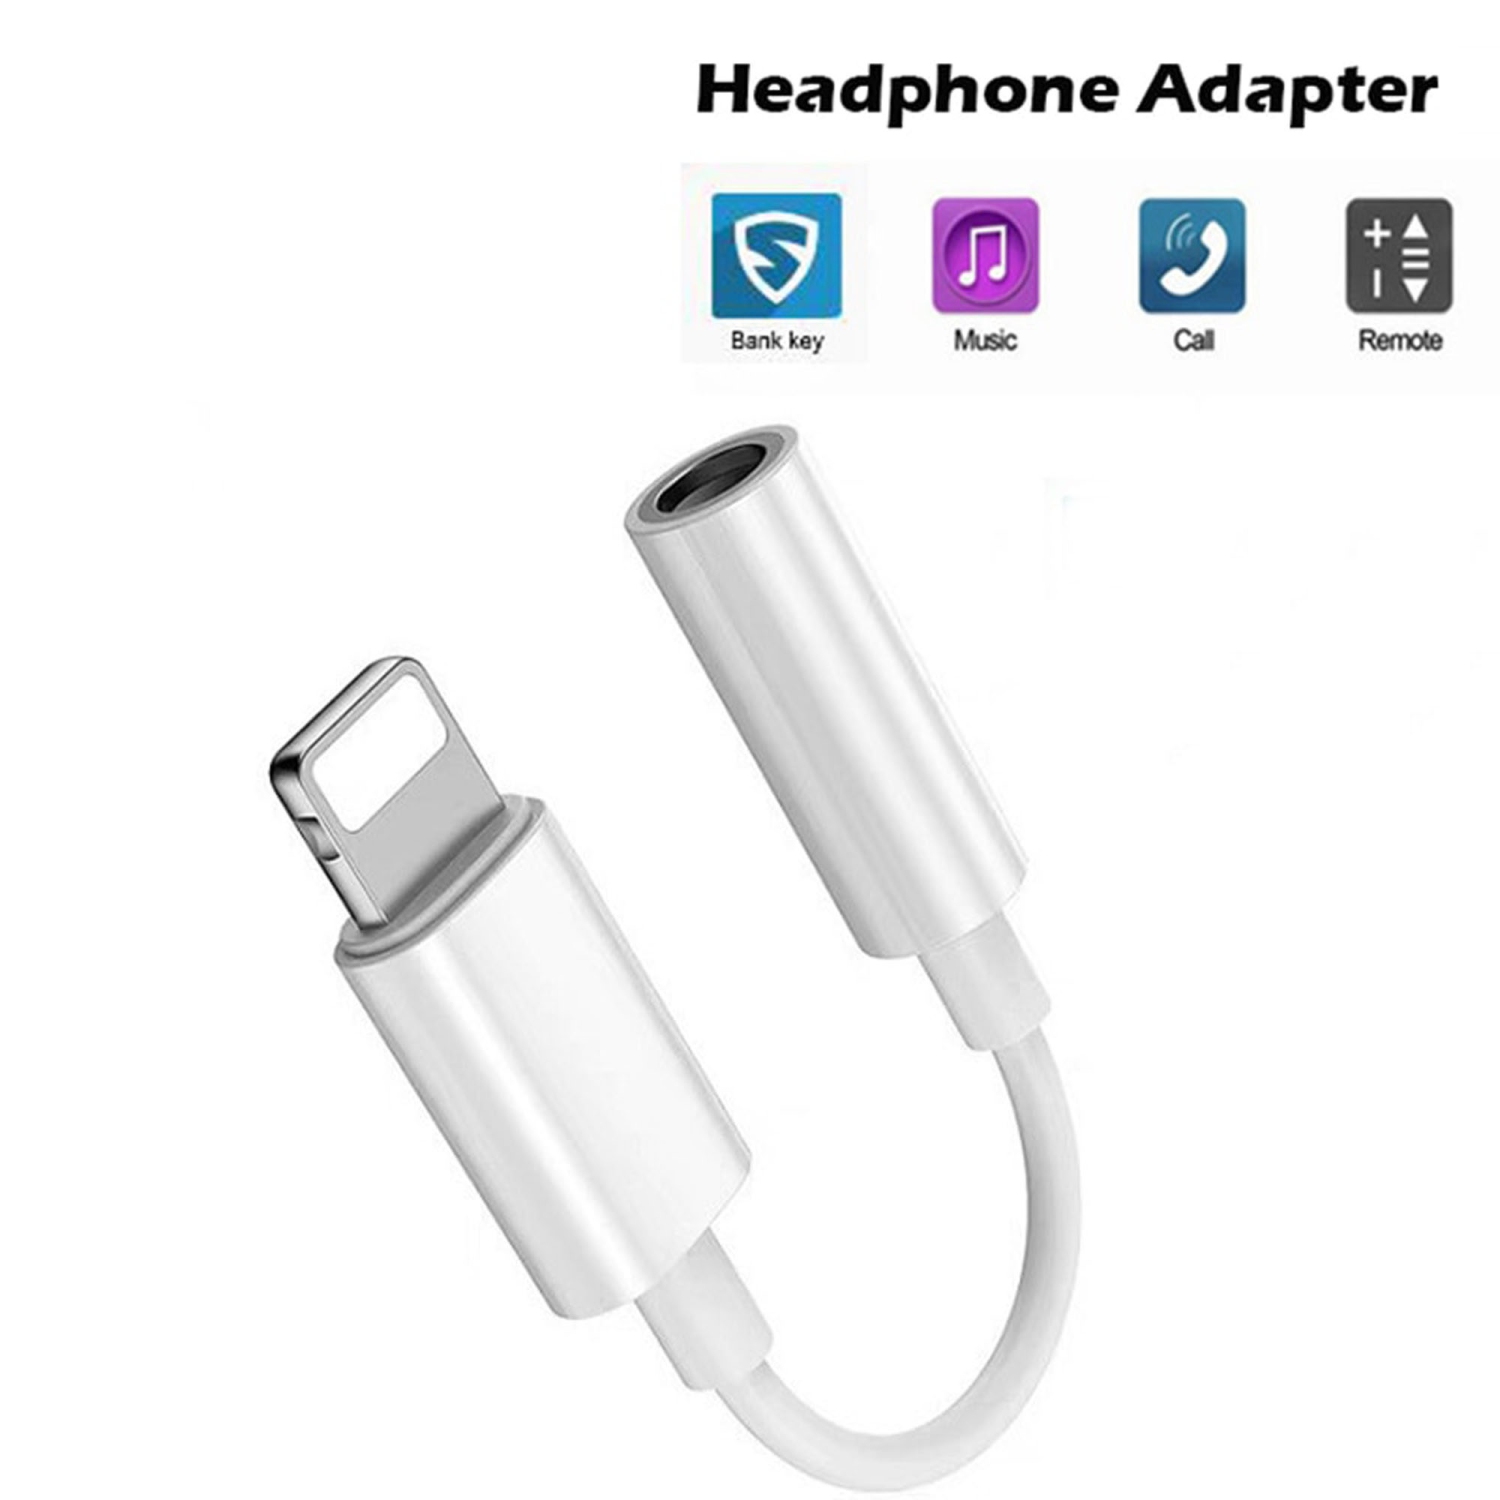 iPhone AUX Adapter for Headphone Jack Cable Dongle Lightning to 3.5mm Splitter Apple MFI Certified Audio Cord